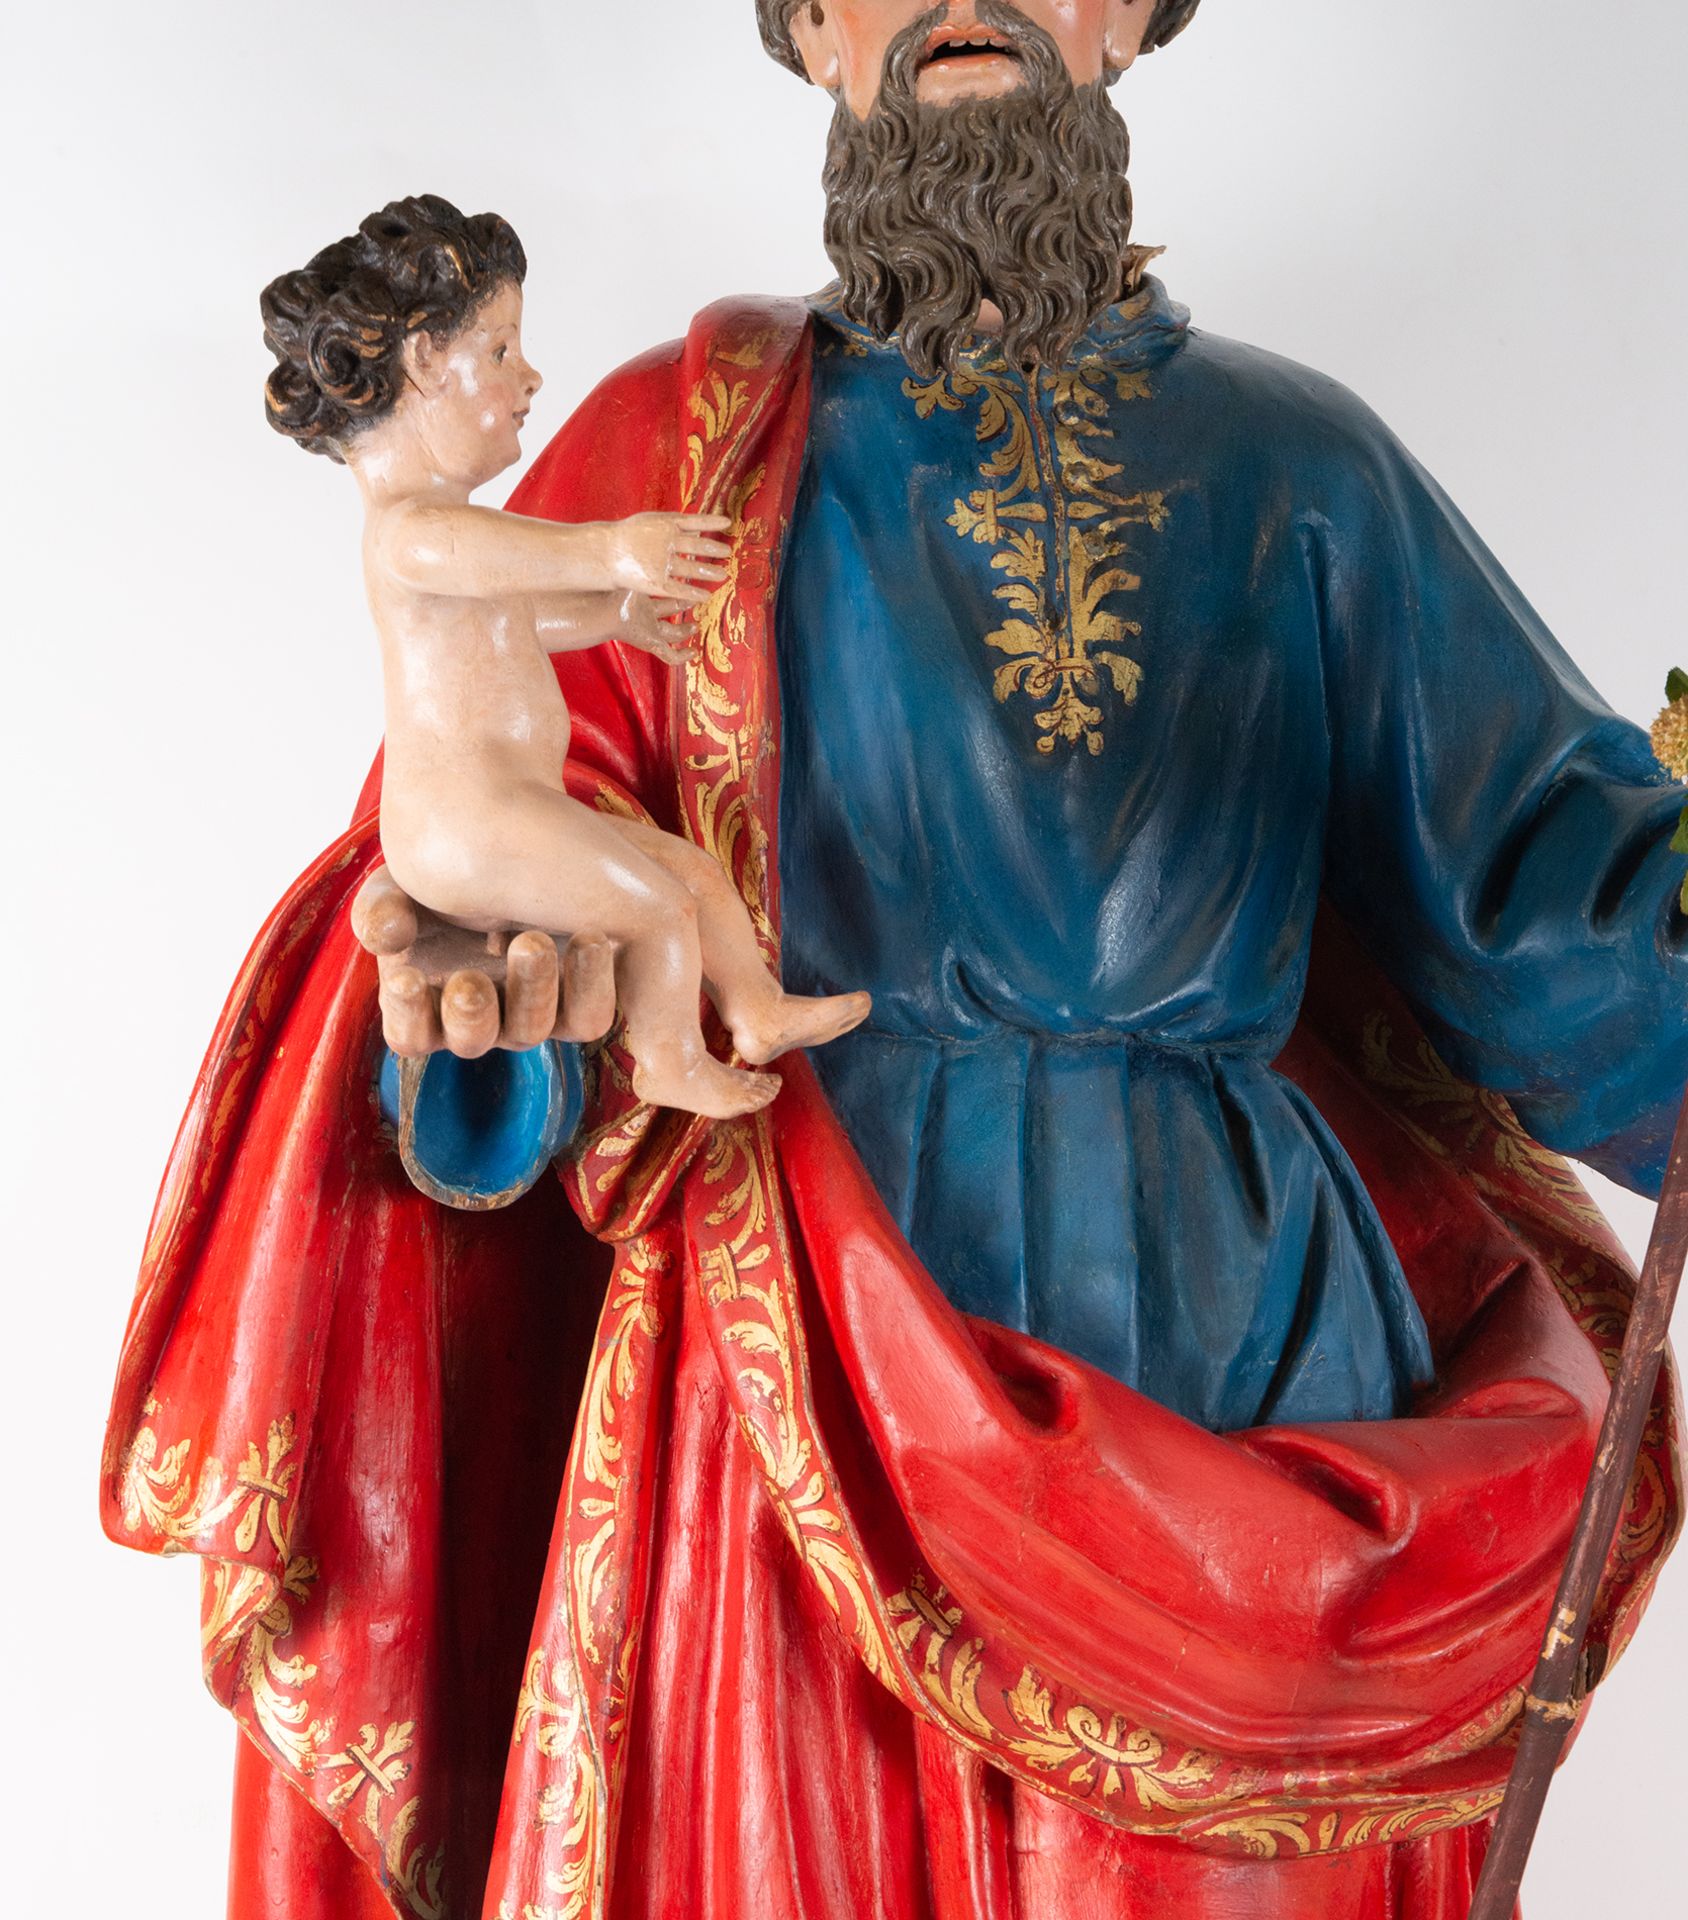 Spectacular Carving of Saint Joseph with the Child in Arms, school of JosŽ Laughing, Granada school  - Image 5 of 18